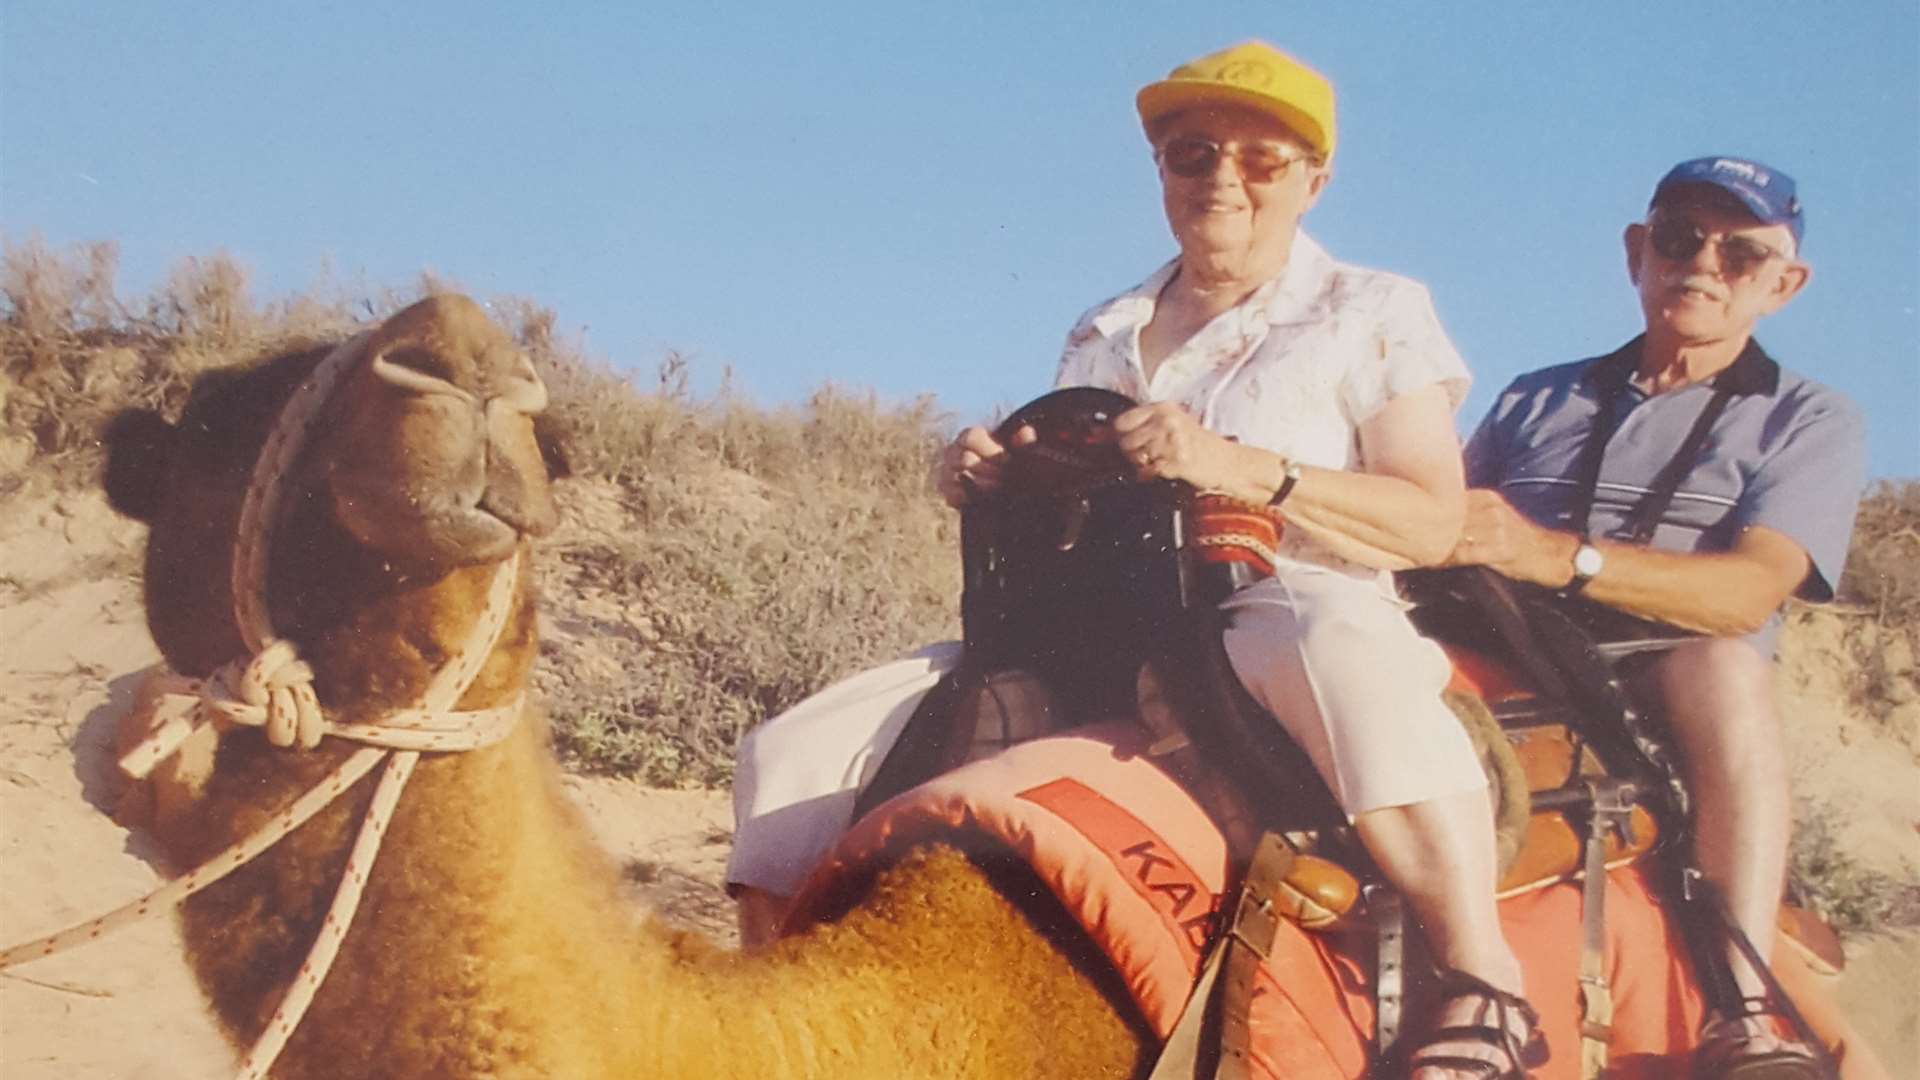 Frank and Frances King ride a camel during a trip to Australia in 2000.